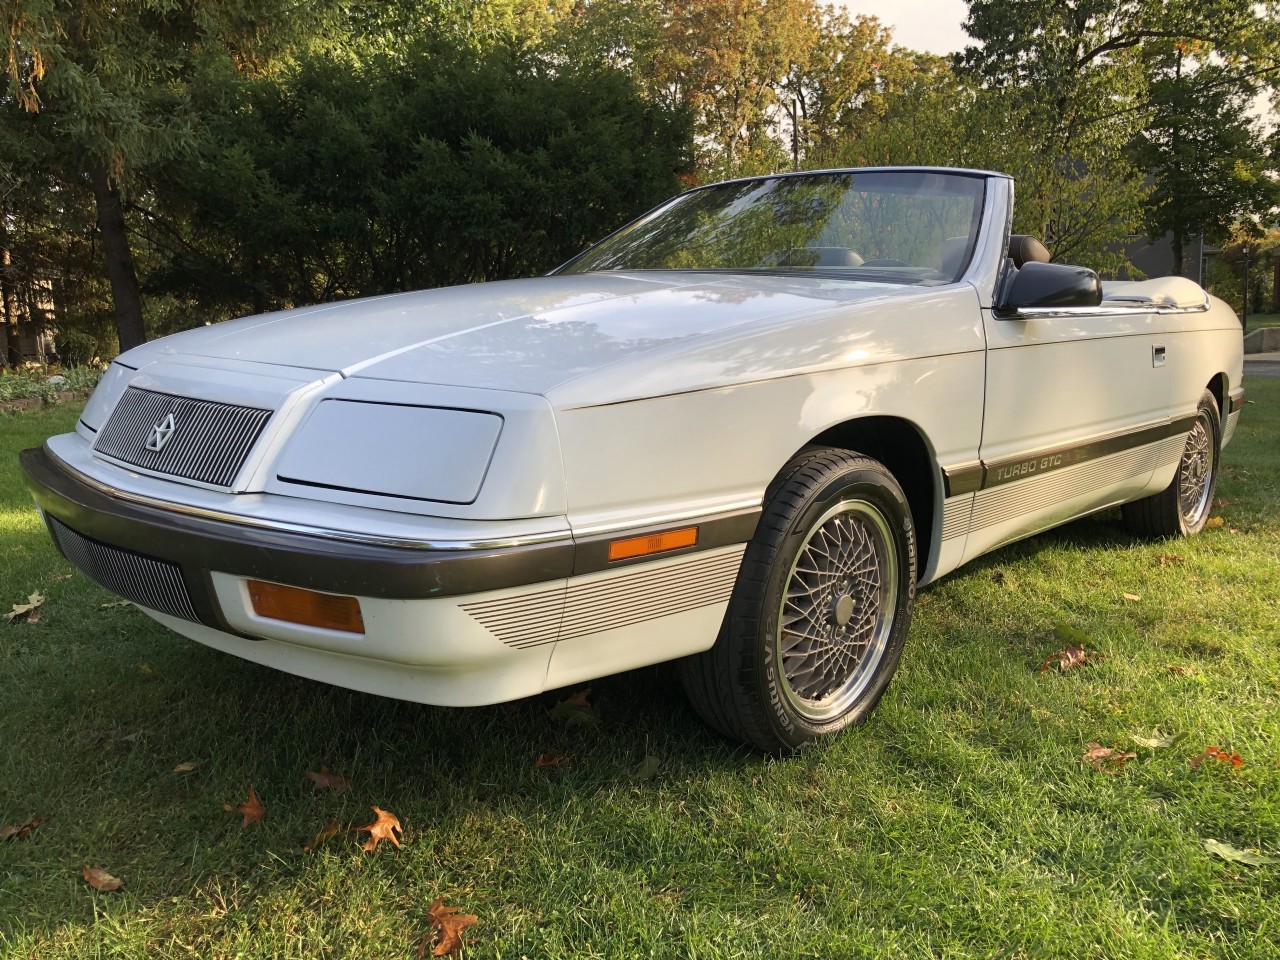 The recommended oil type and oil capacity for a Chrysler LeBaron